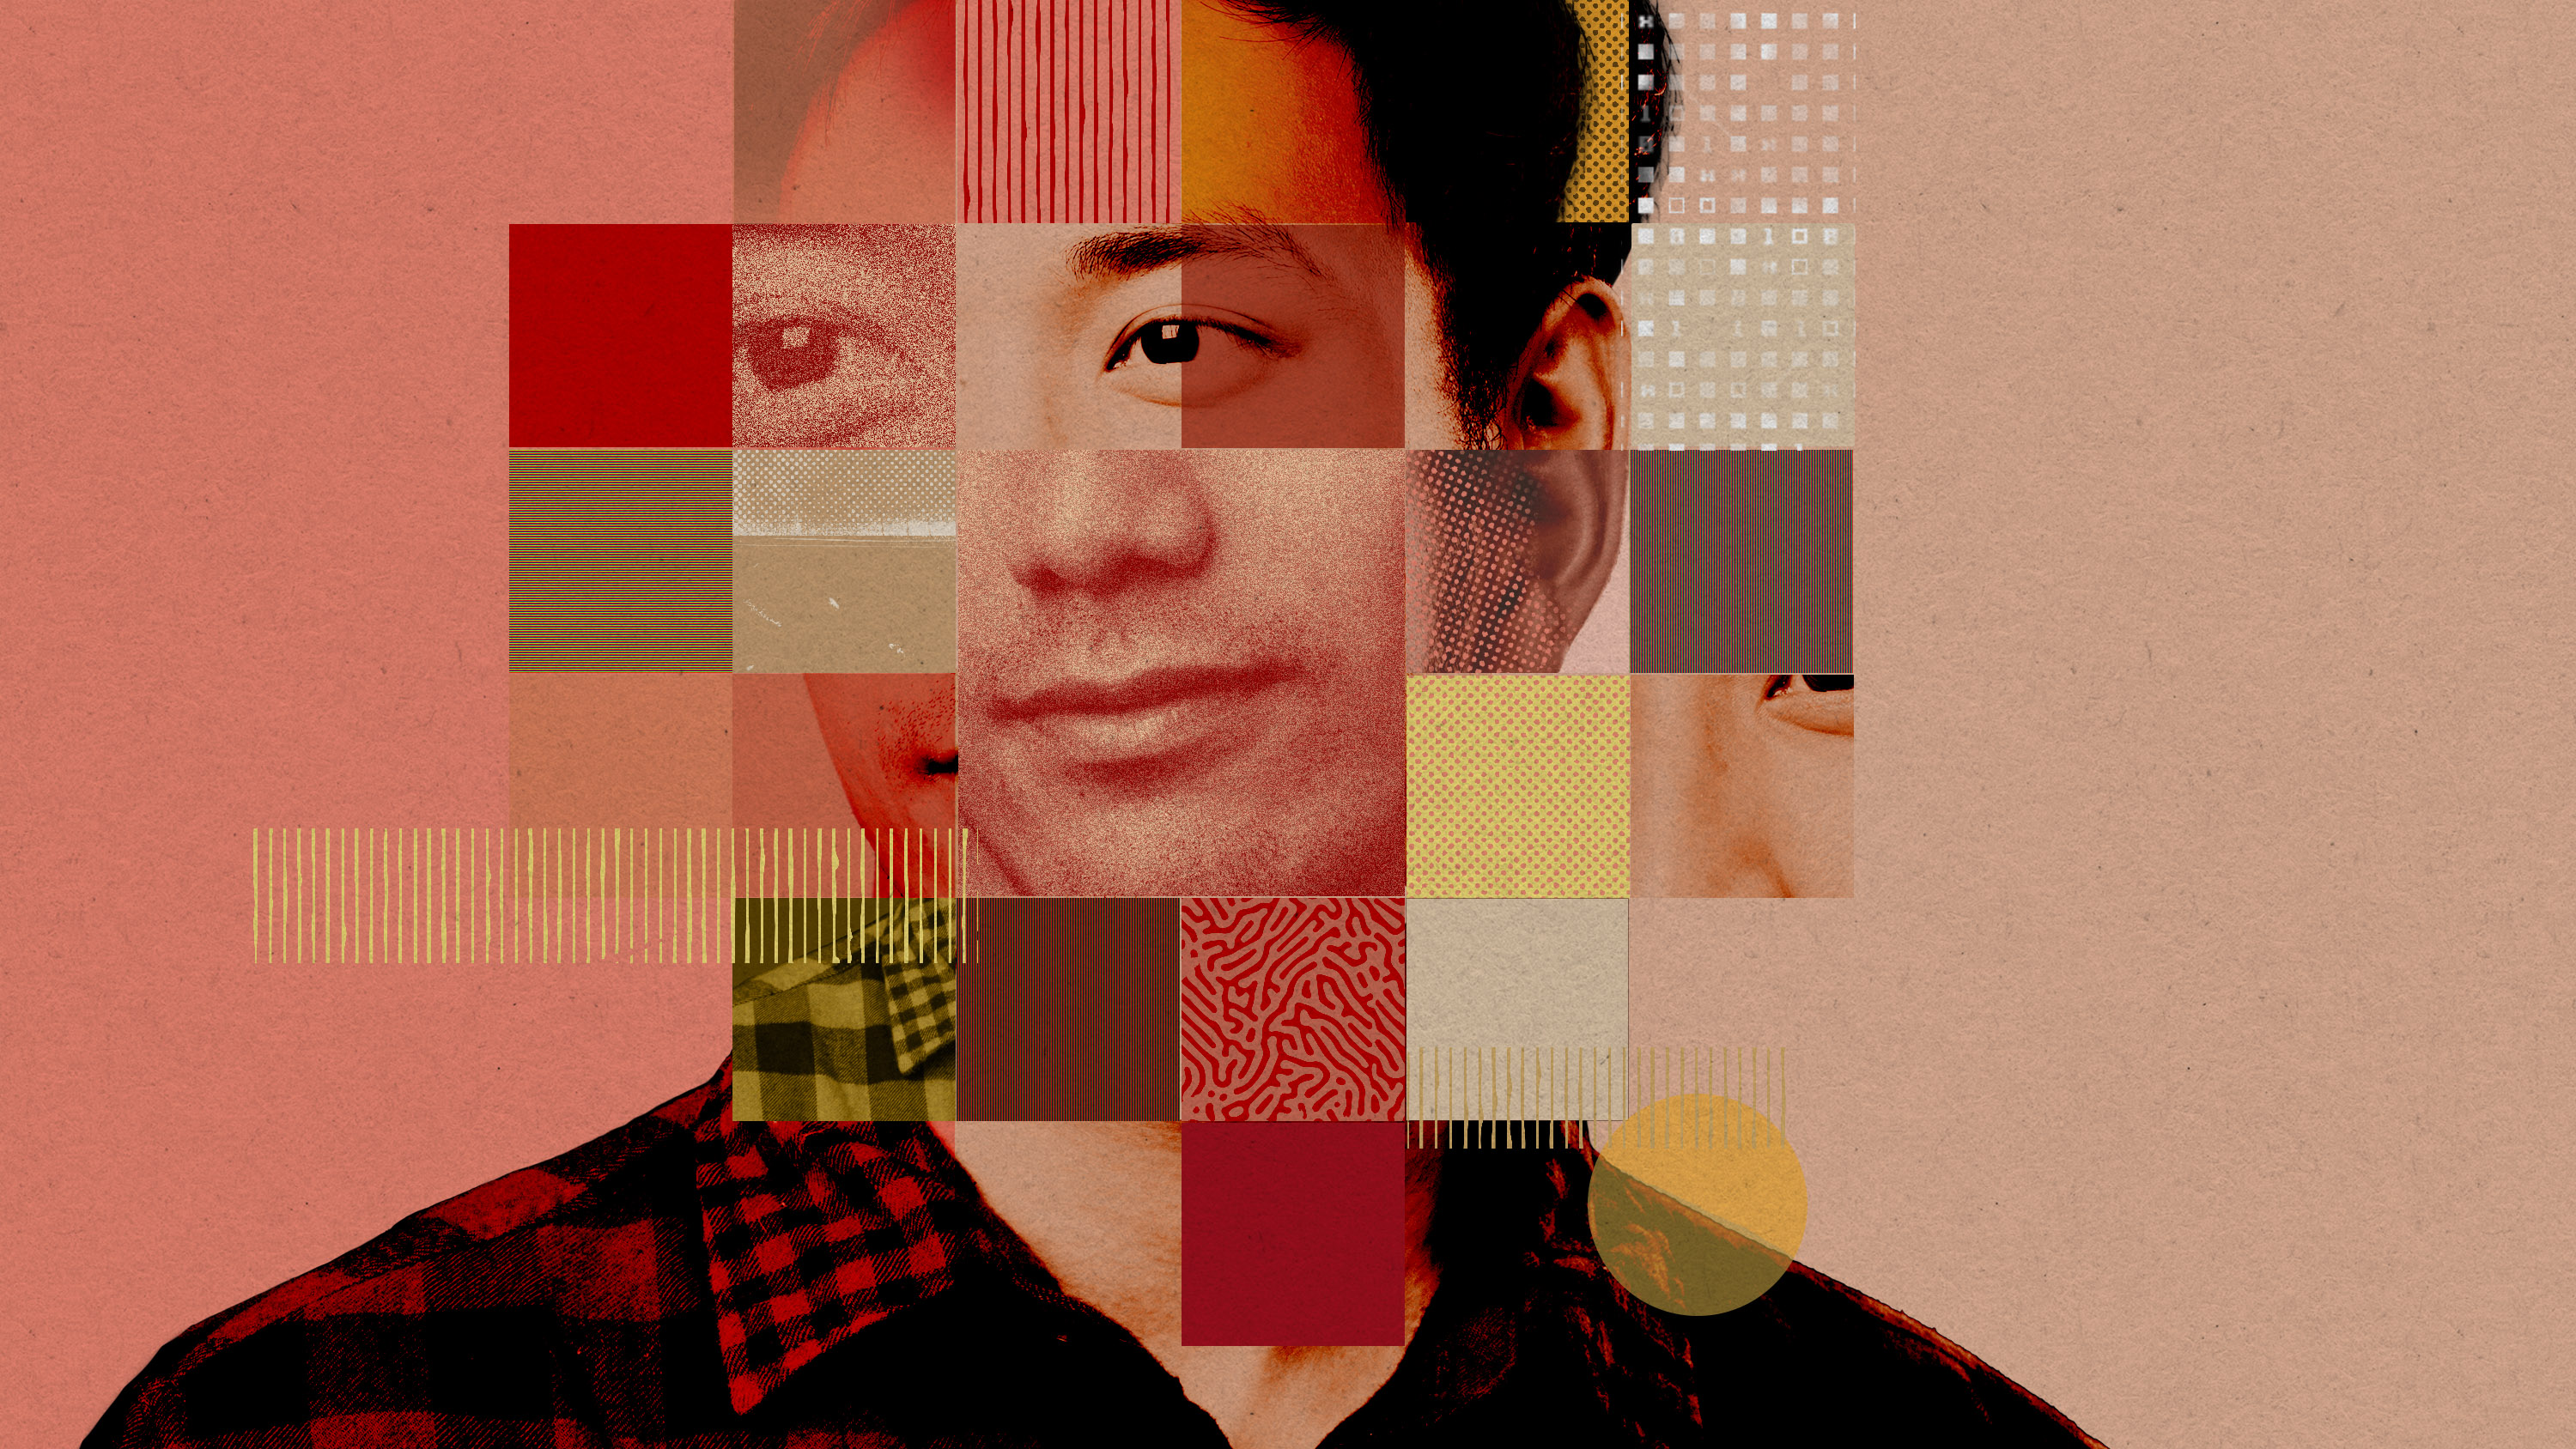 a man's portrait broken and reassembled into a grid with bar code and fingerprint patterns